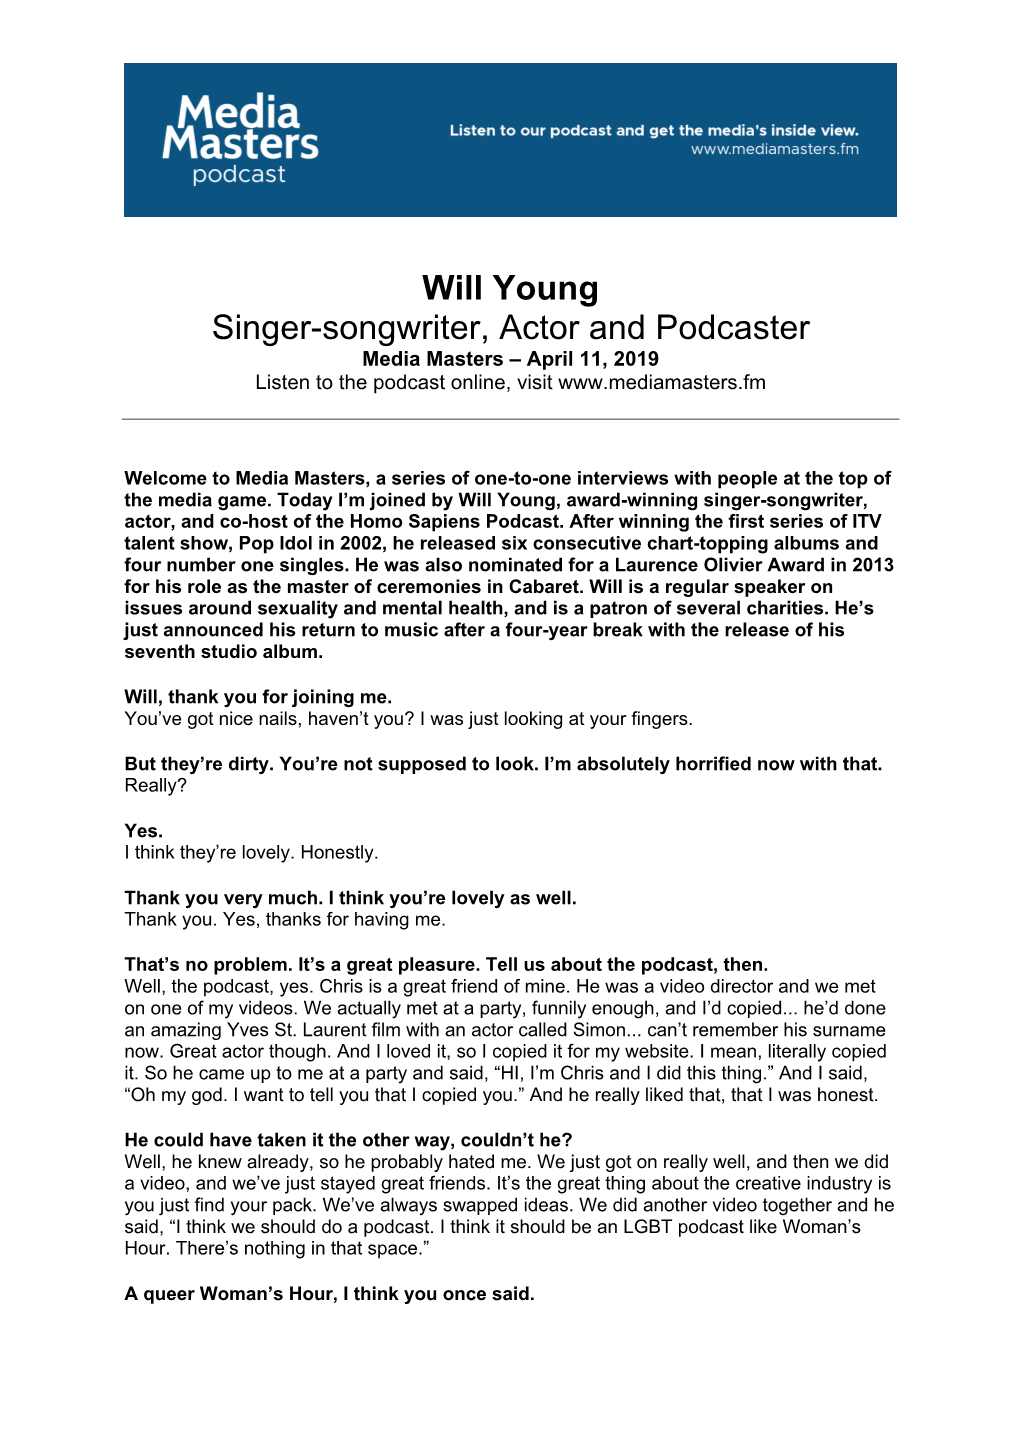 Will Young Singer-Songwriter, Actor and Podcaster Media Masters – April 11, 2019 Listen to the Podcast Online, Visit